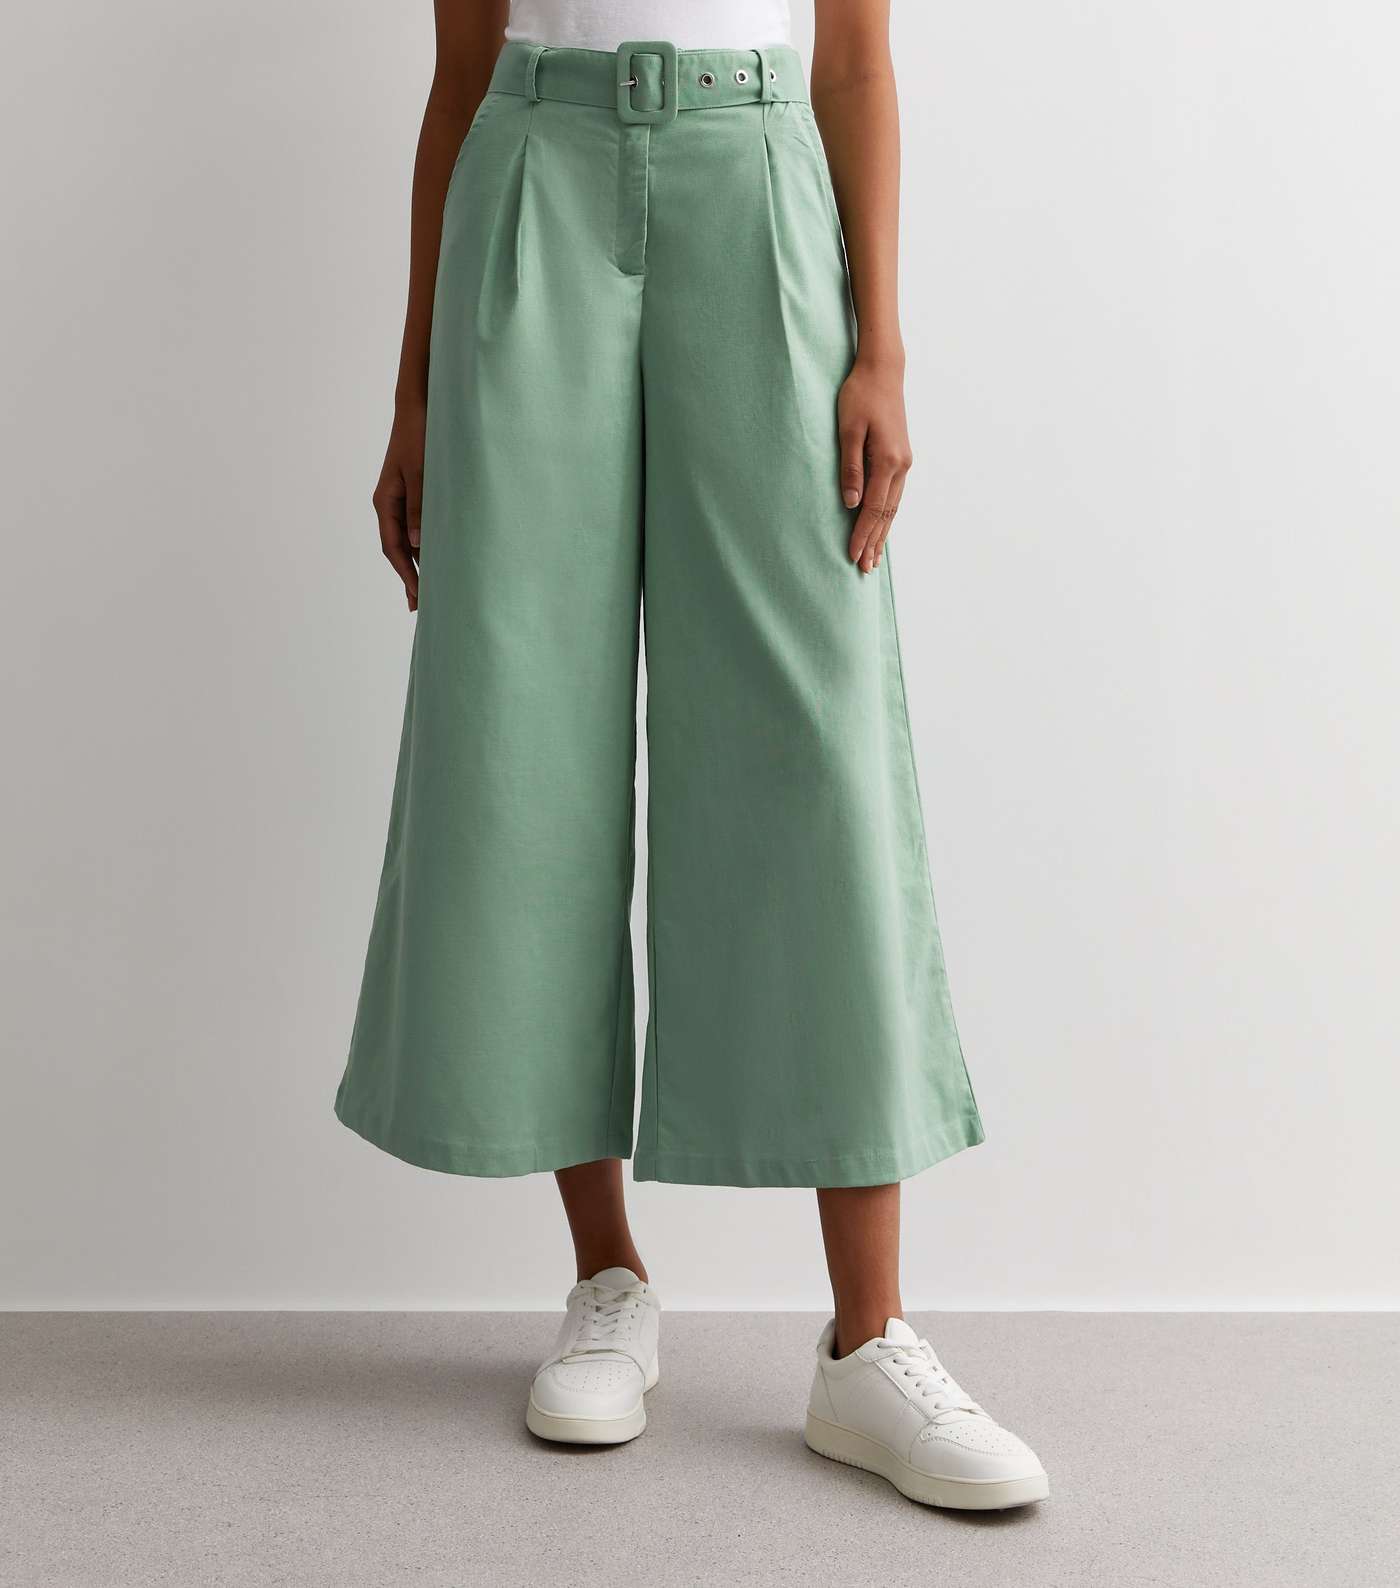 Gini London Green Linen-Look Belted Wide Leg Trousers Image 3